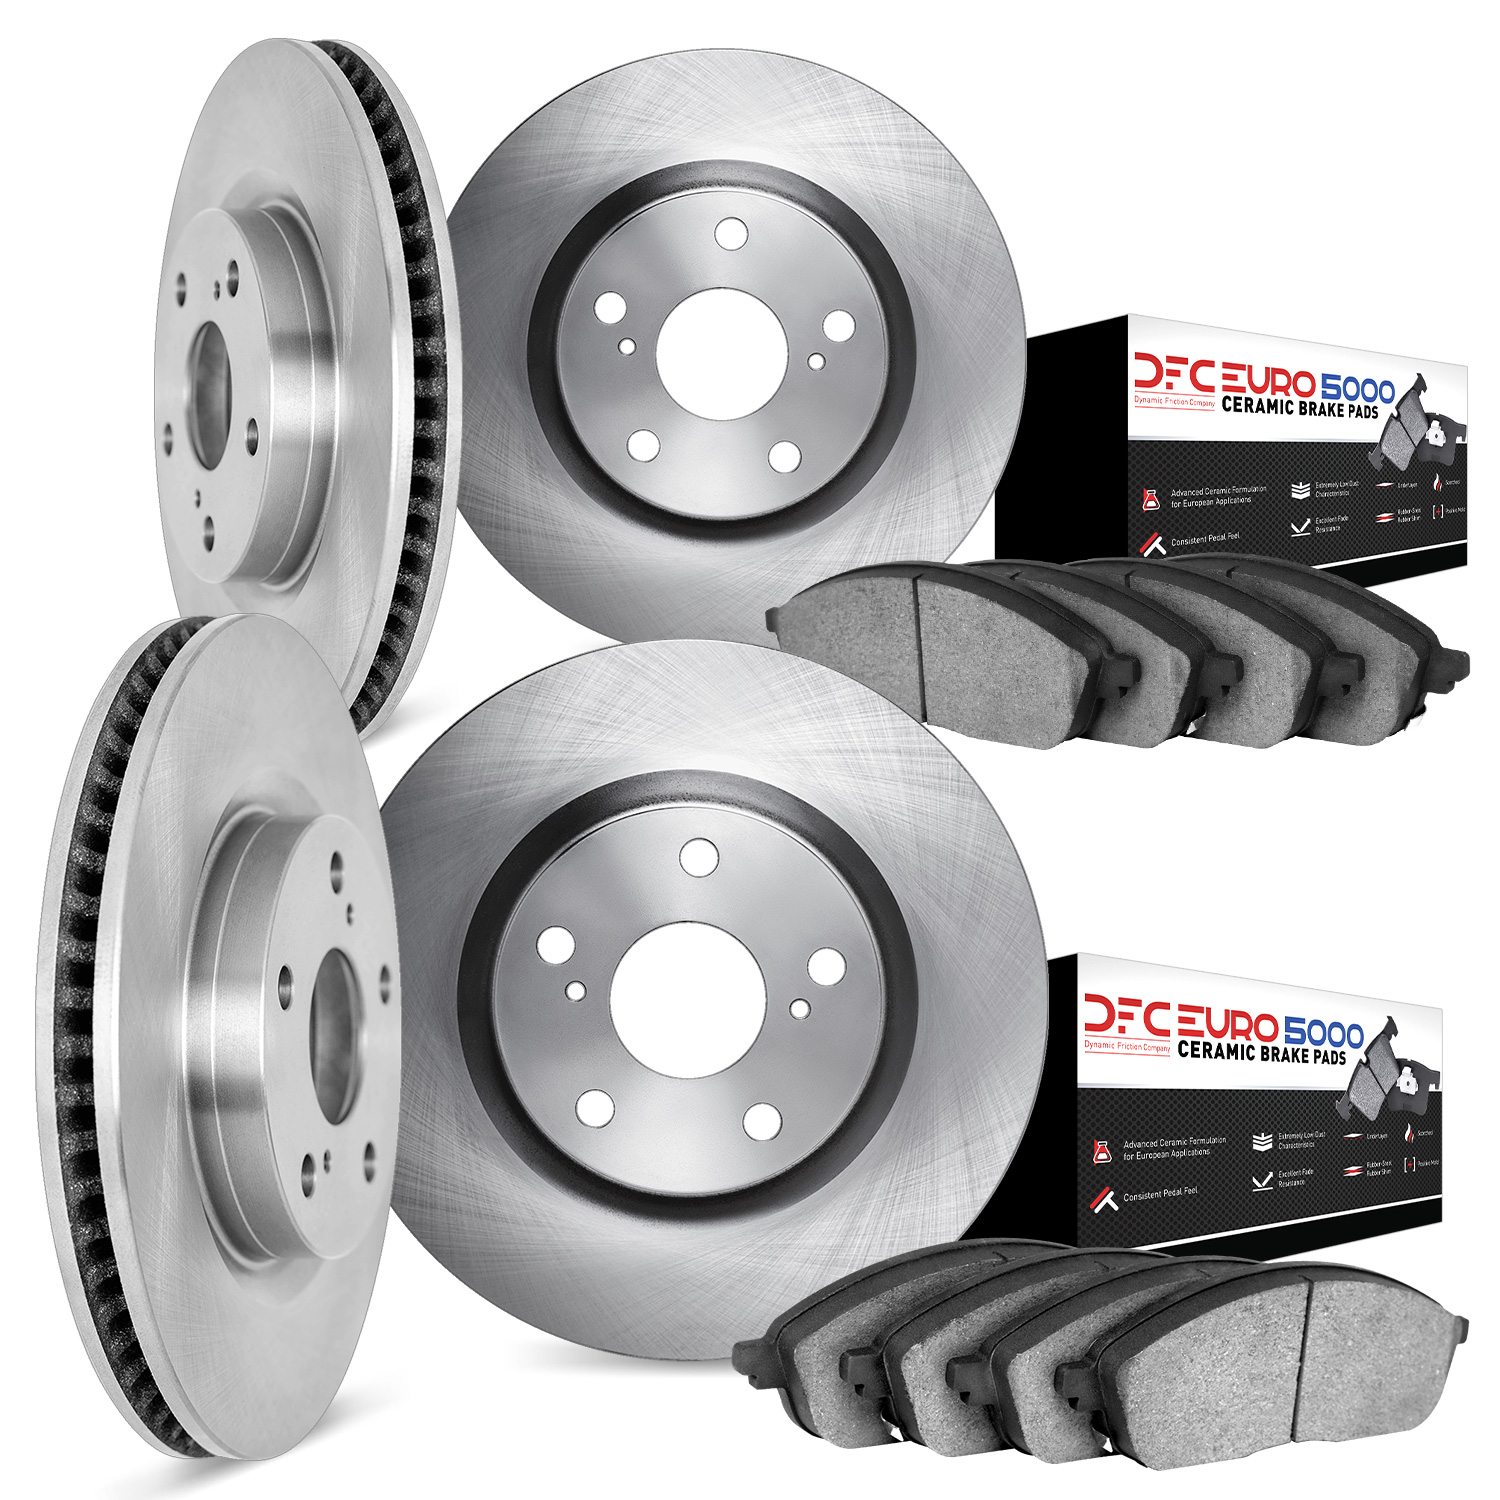 6604-31017 Brake Rotors w/5000 Euro Ceramic Brake Pads, 2006-2008 BMW, Position: Front and Rear